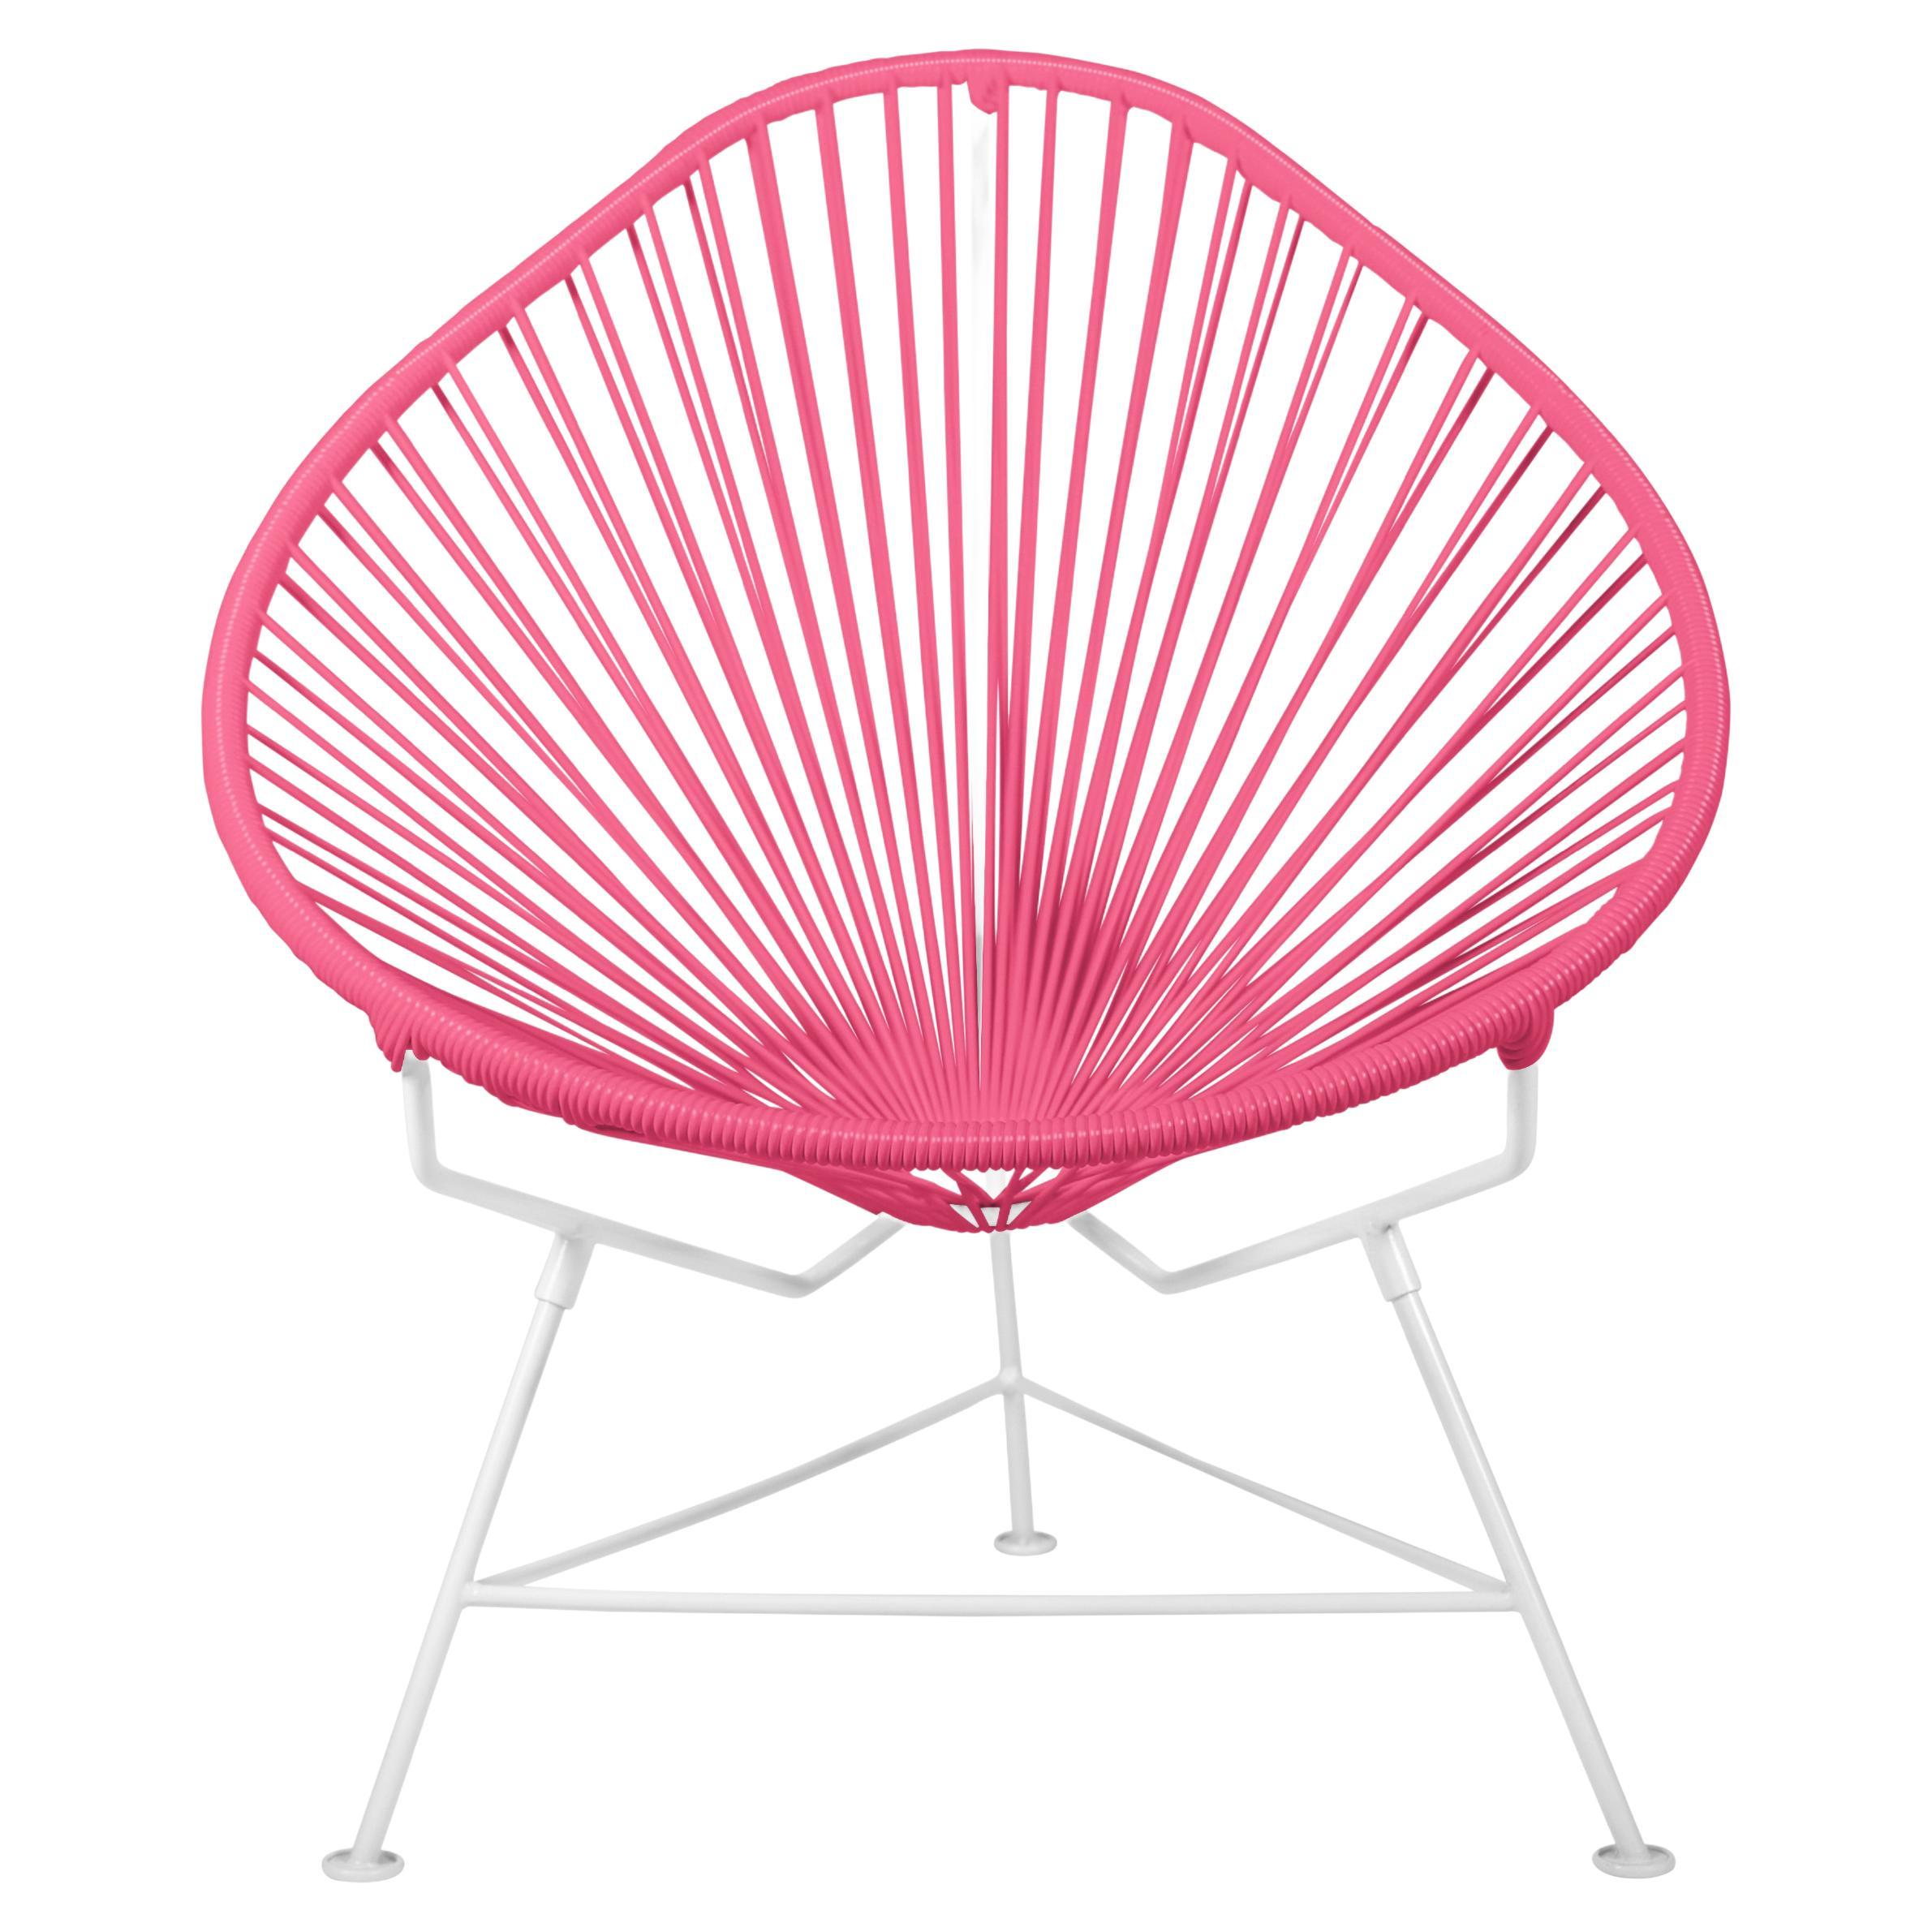 Innit Designs Acapulco Chair Pink Weave on White Frame For Sale